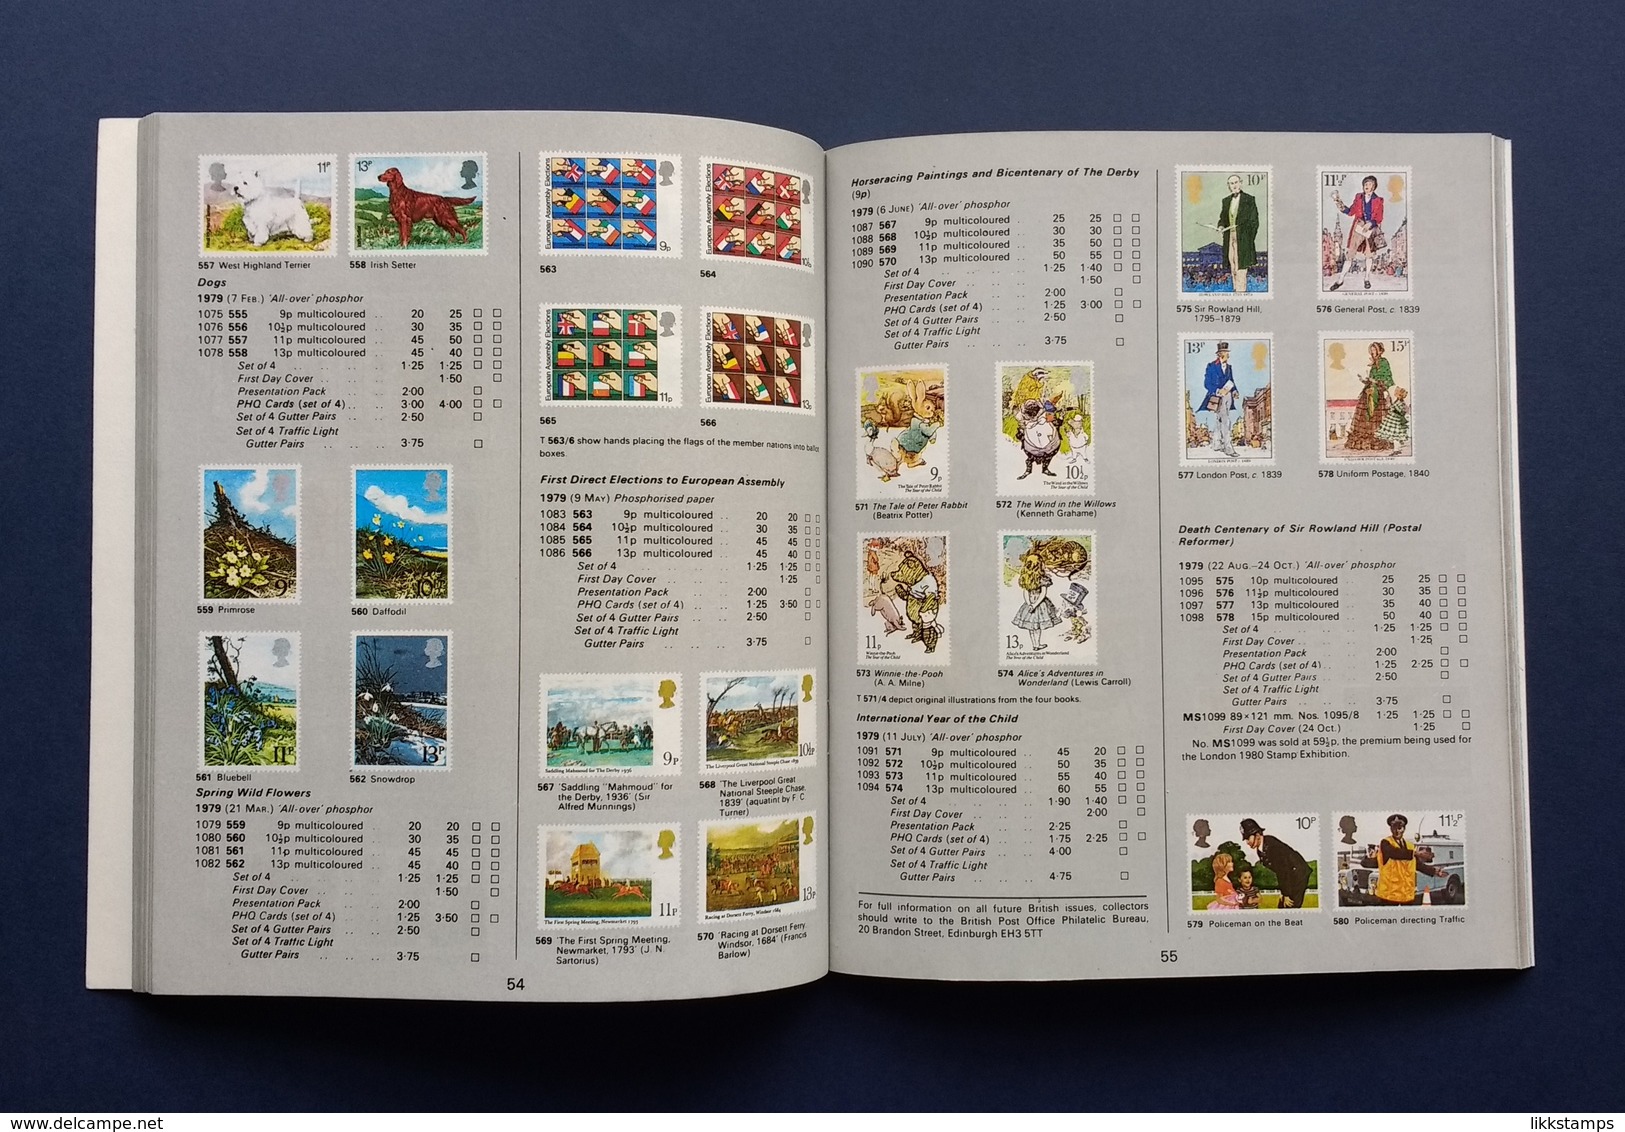 COLLECT BRITISH STAMPS 44th EDITION ( A STANLEY GIBBONS CHECK LIST ) 1992 USED #L0101 (B7) - United Kingdom